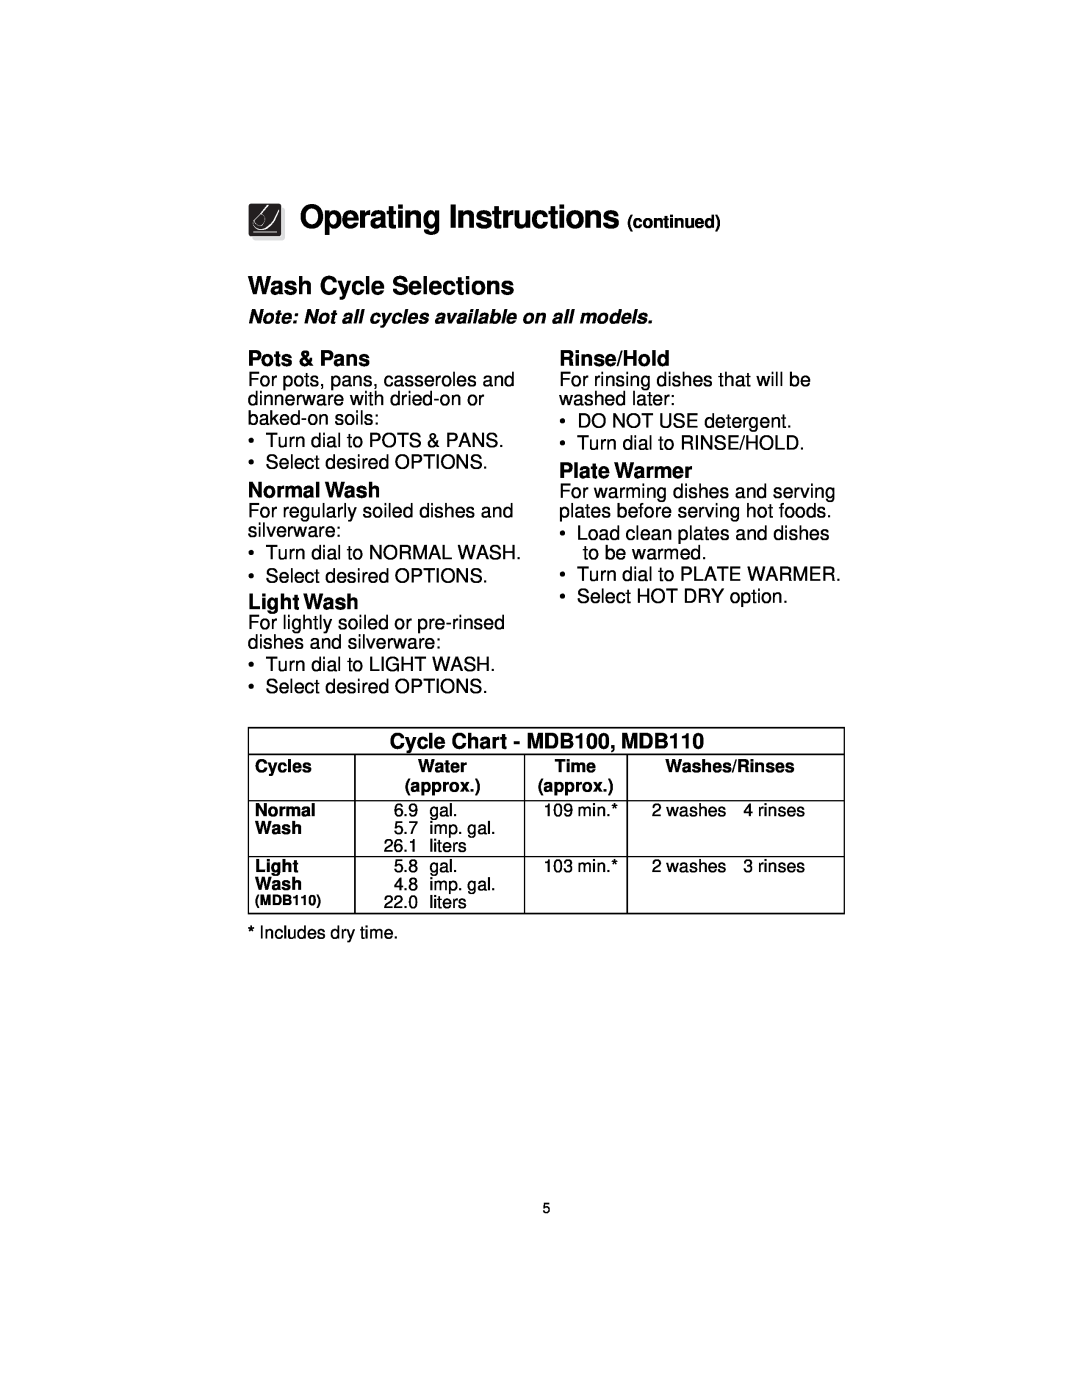 Frigidaire F71C12 Operating Instructions continued, Wash Cycle Selections, Note Not all cycles available on all models 